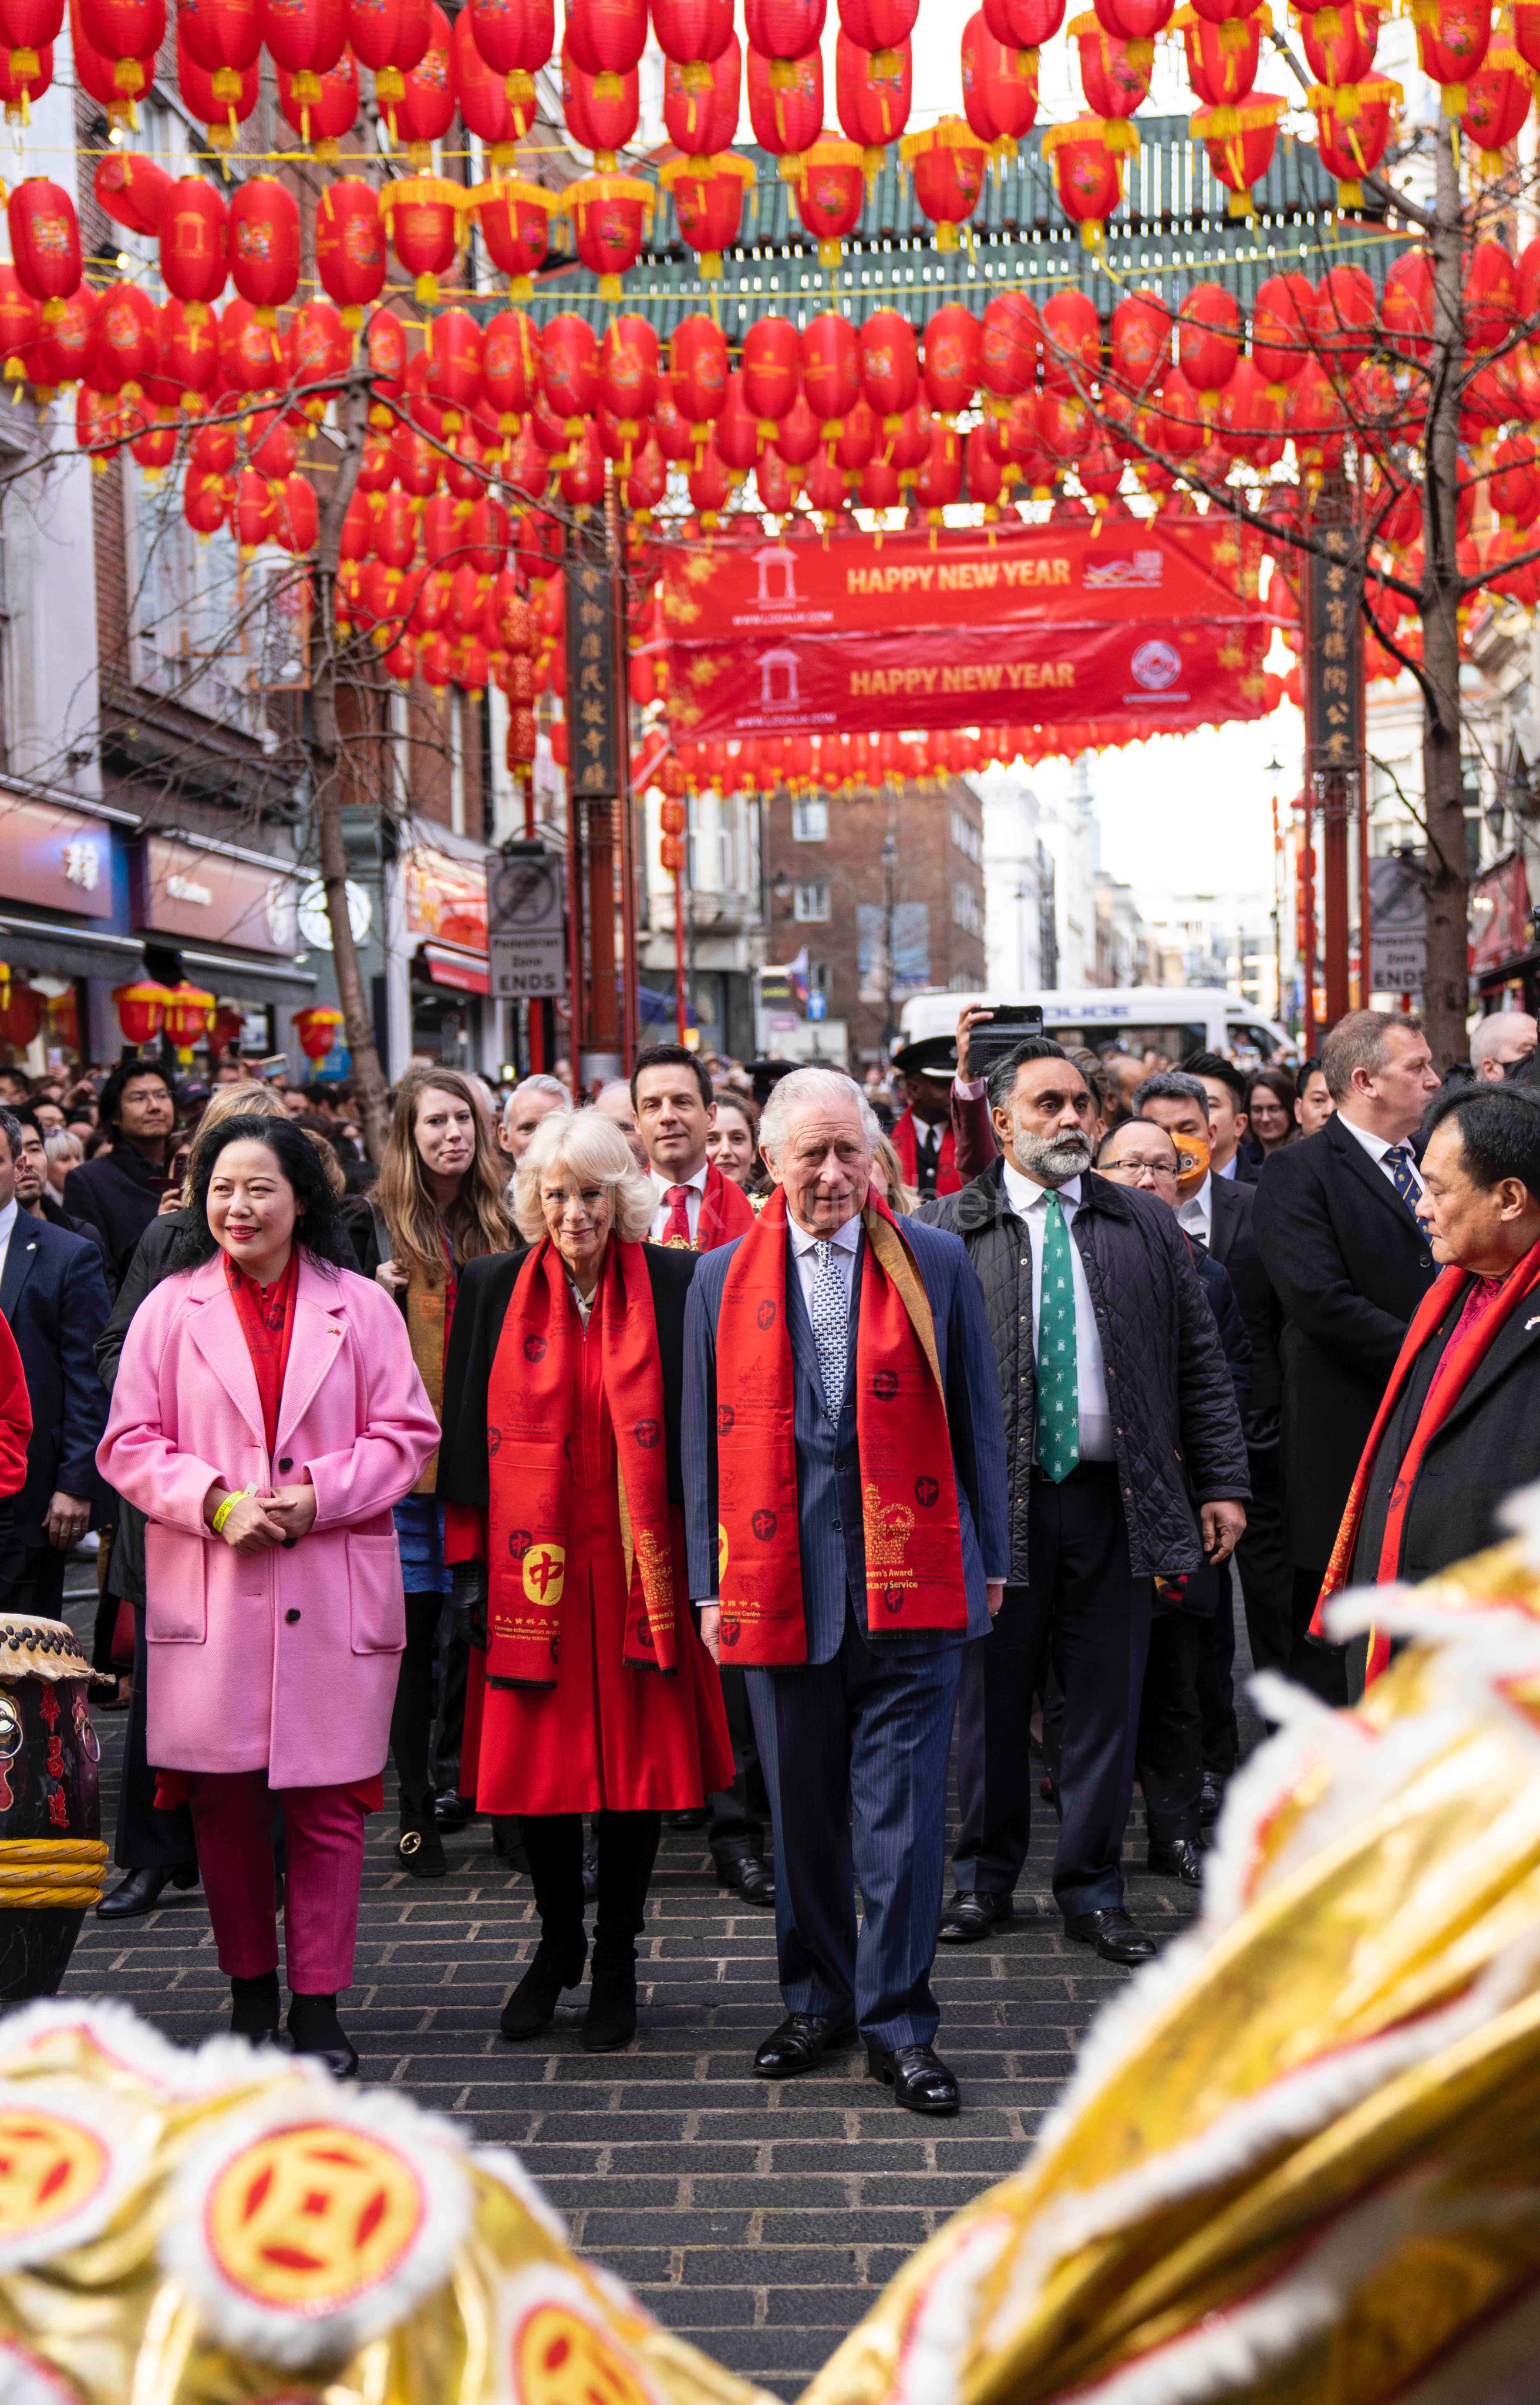 Mark Cuthbert on Twitter: &quot;Prince Charles, Prince of Wales and Camilla, Duchess of Cornwall visit Chinatown on the occasion of the Lunar New Year in London. #royal #princecharles #duchessofcornwall https://t.co/W2Wx8reOe4&quot; / Twitter